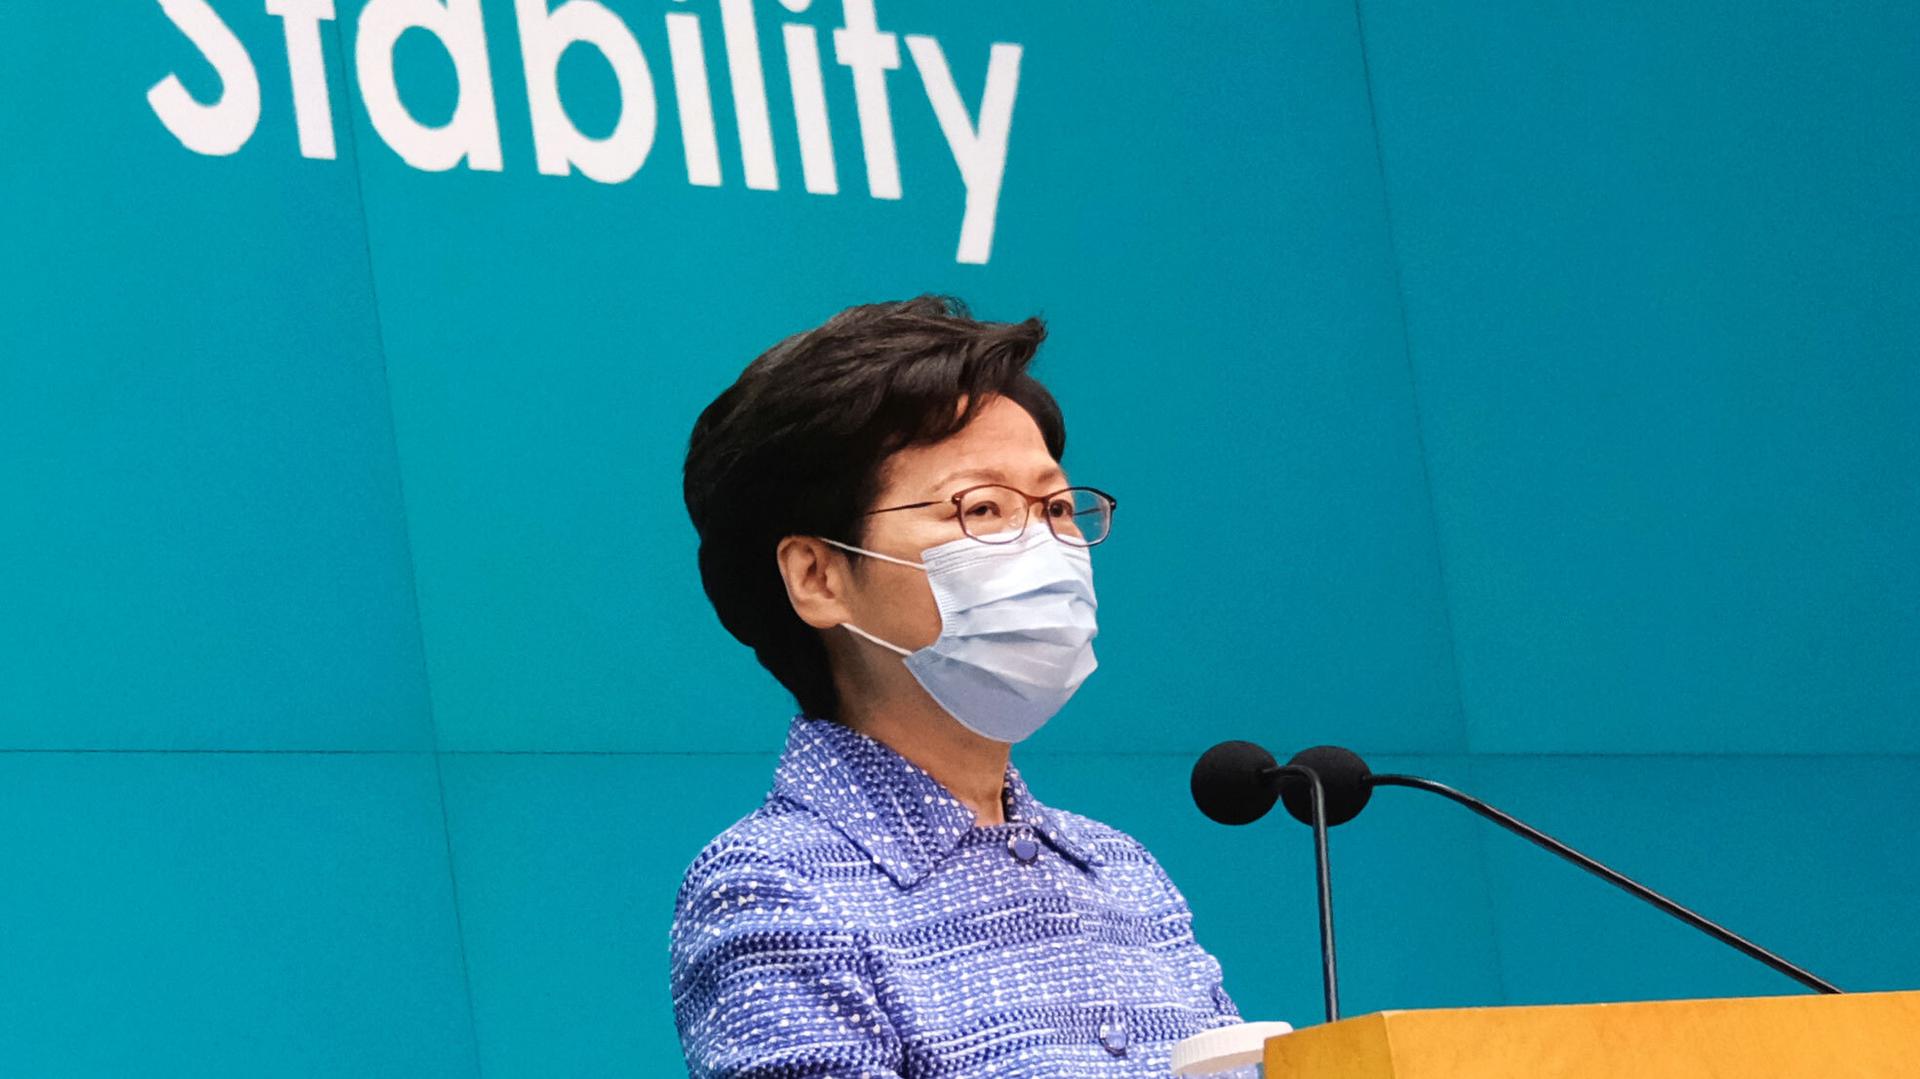 Hong Kong Chief Executive Carrie Lam is shown standing at a wooden podium with two small microphones and wearing a protective face mask.